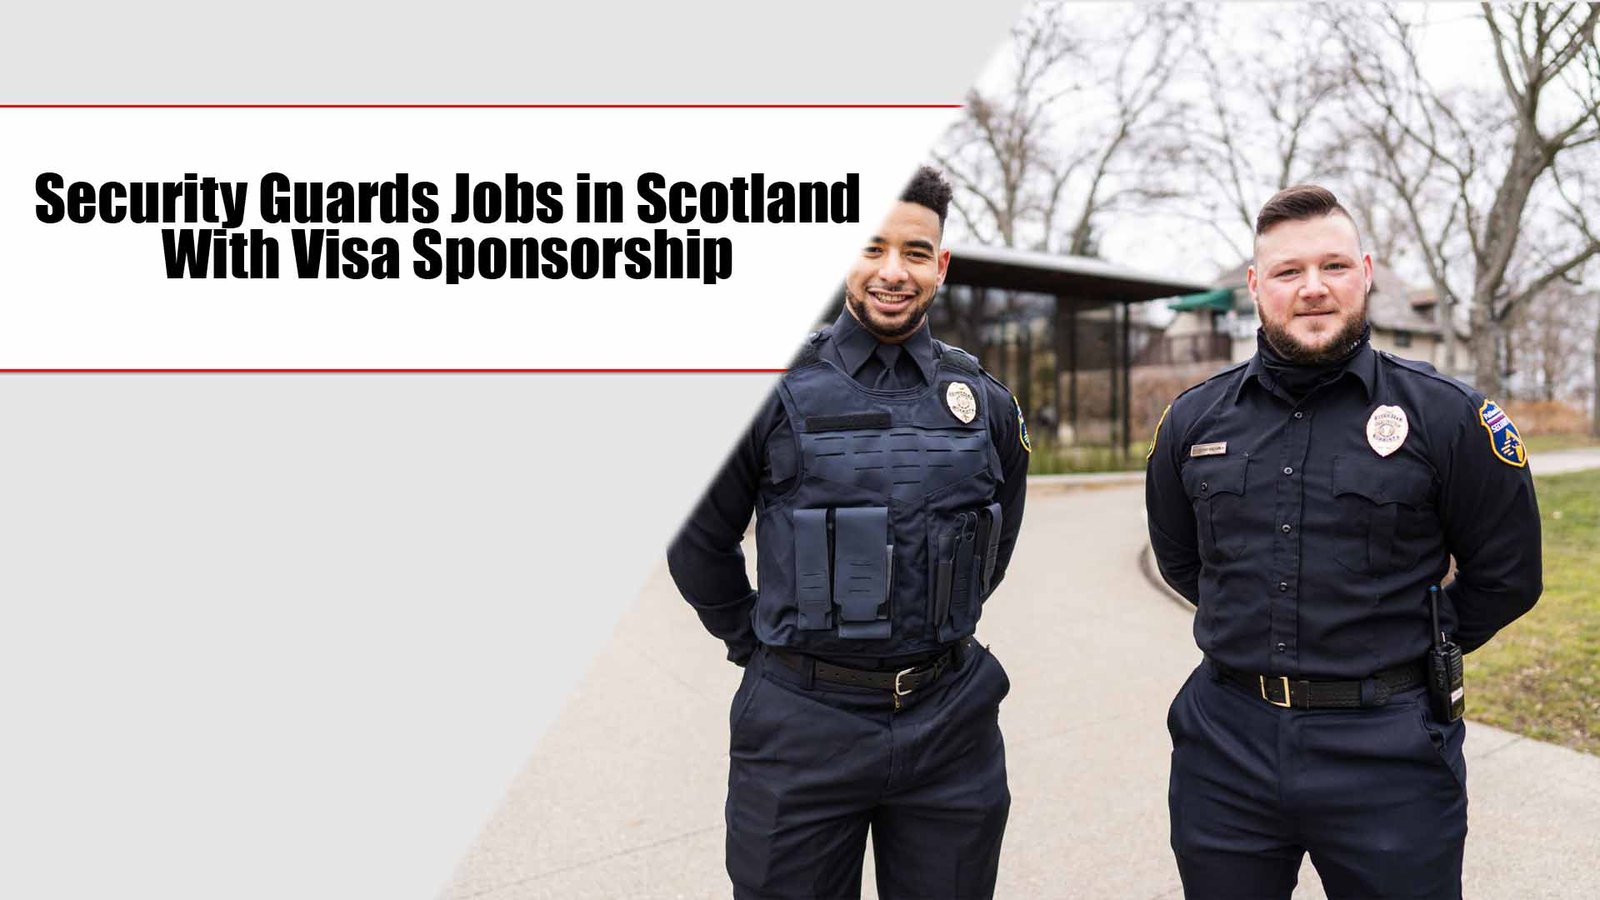 Security Guards Jobs in Scotland with Work Permit and Visa Sponsorship (£20 per hour)